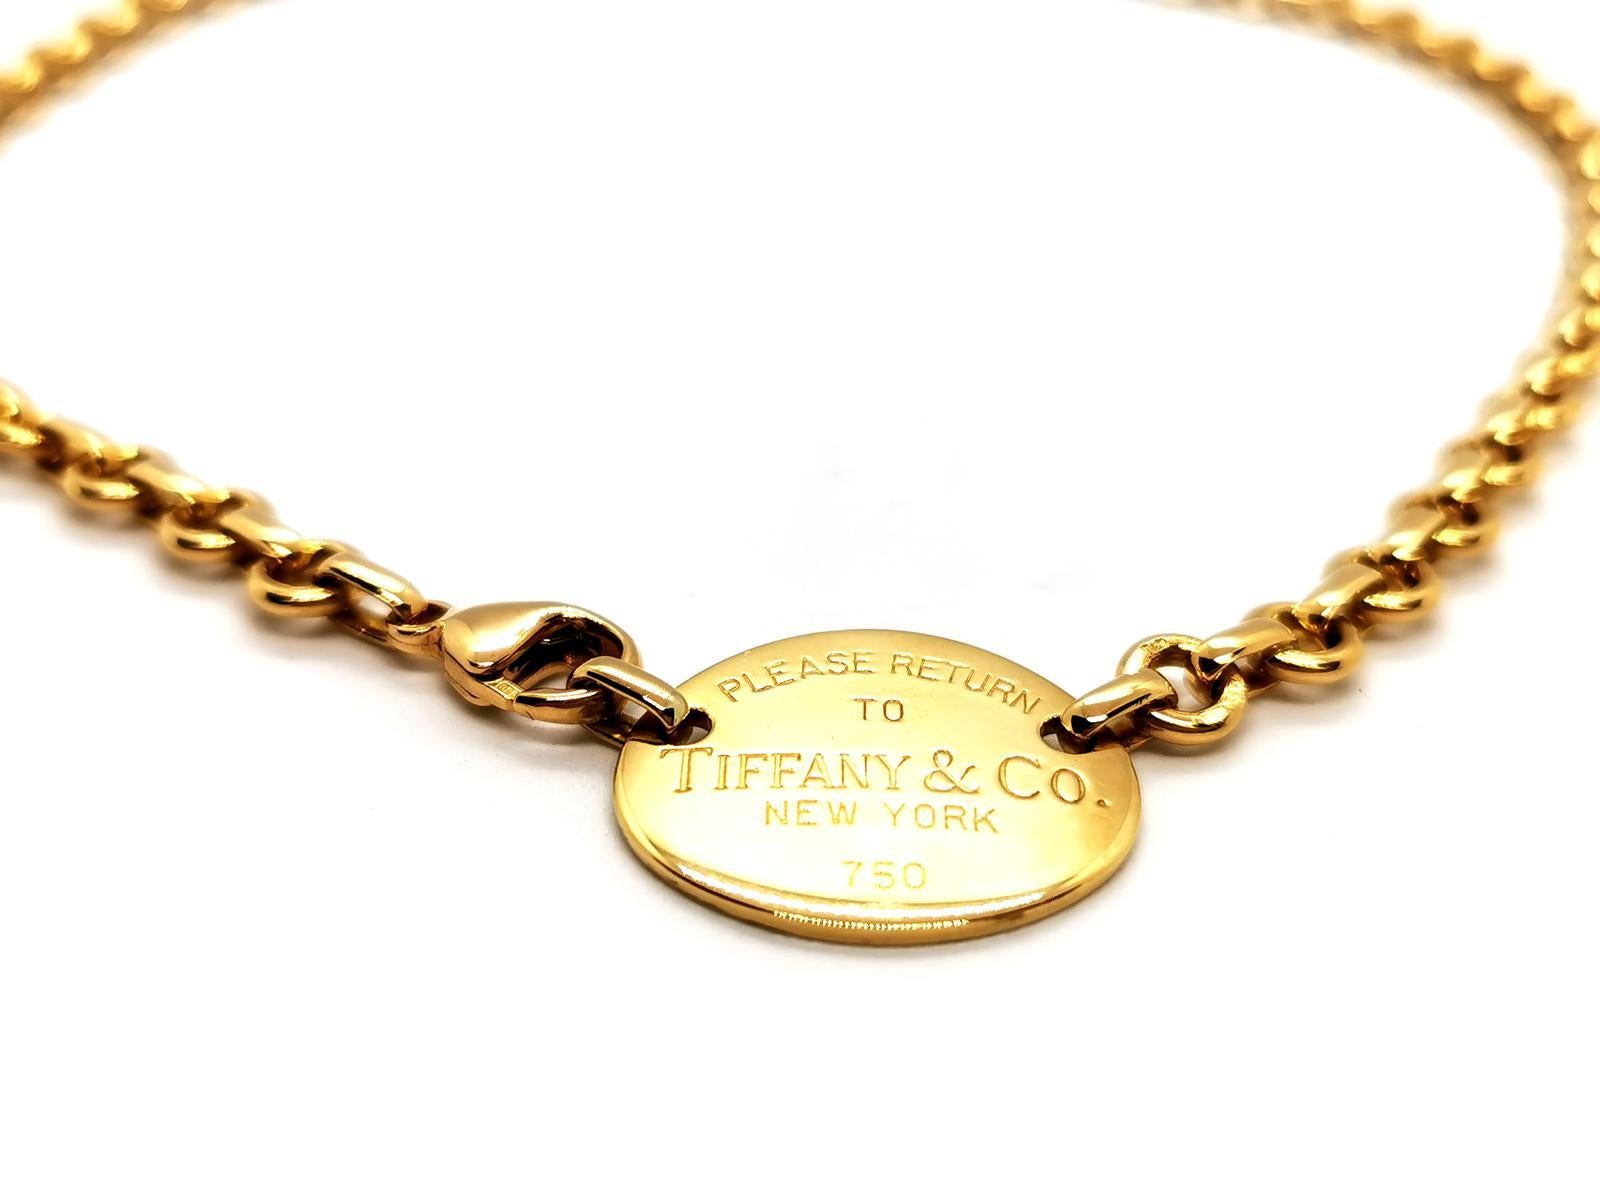 Collier signed by Tiffany & Co collection Return to Tiffany. yellow gold 750 thousandths (18 carats). wide flat belcher link chain. and domed oval plaque engraved: Please return to Tiffany & Co New York. length of the necklace: 40 cm chain width: